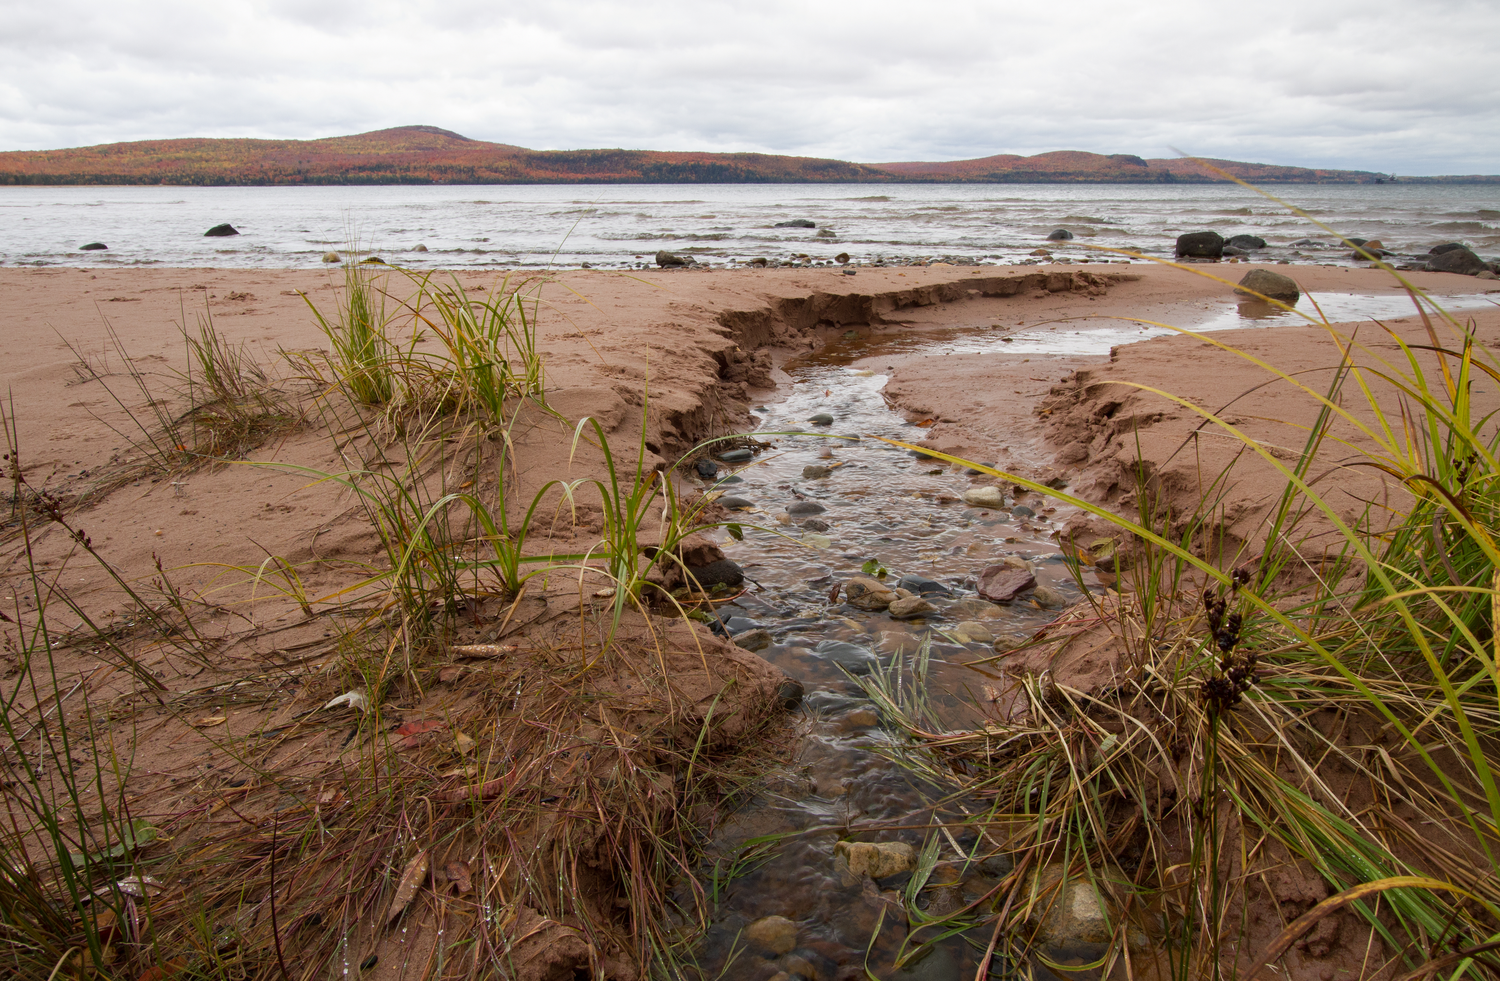 A sandy and rocky shore with a small inlet of water making its way to the lake.